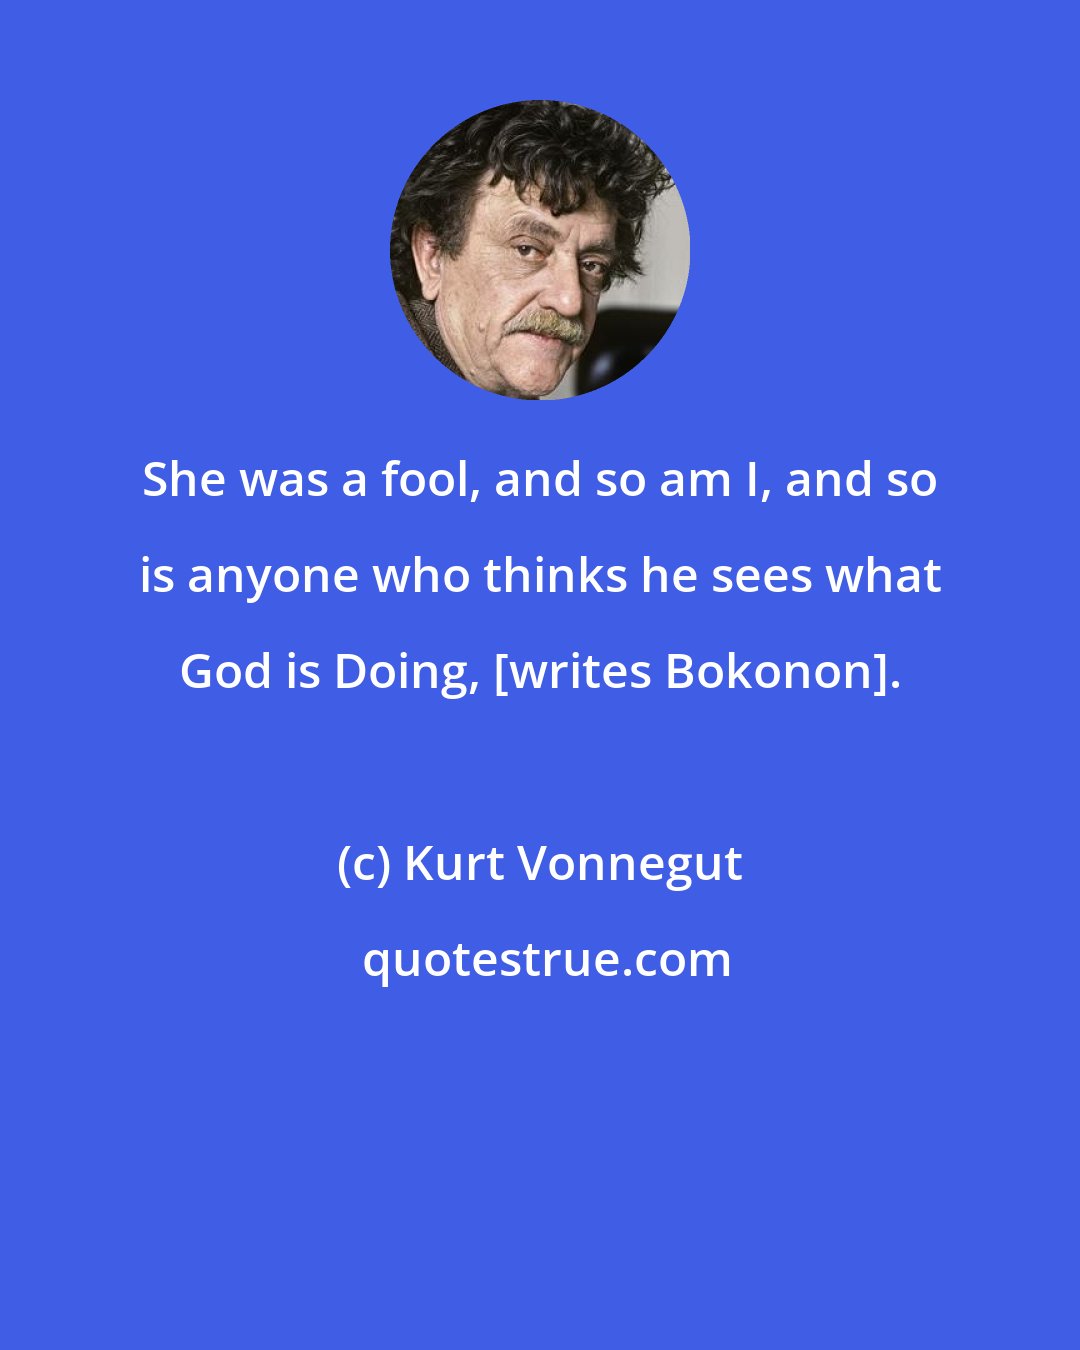 Kurt Vonnegut: She was a fool, and so am I, and so is anyone who thinks he sees what God is Doing, [writes Bokonon].